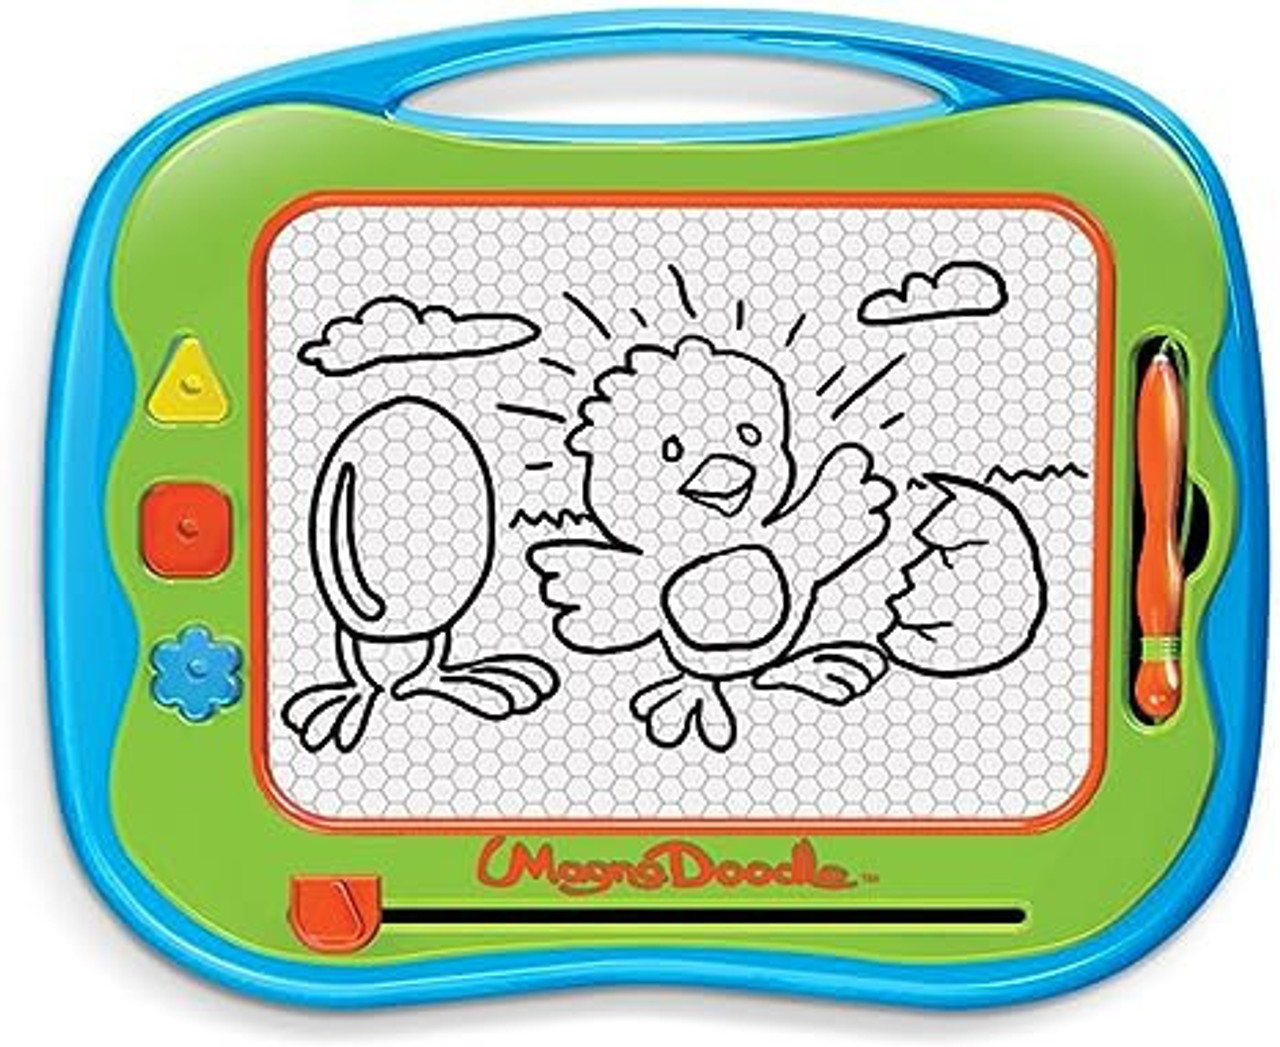 Cra-Z-Art Retro Magna Doodle Magnetic Drawing Board - We-R-Toys